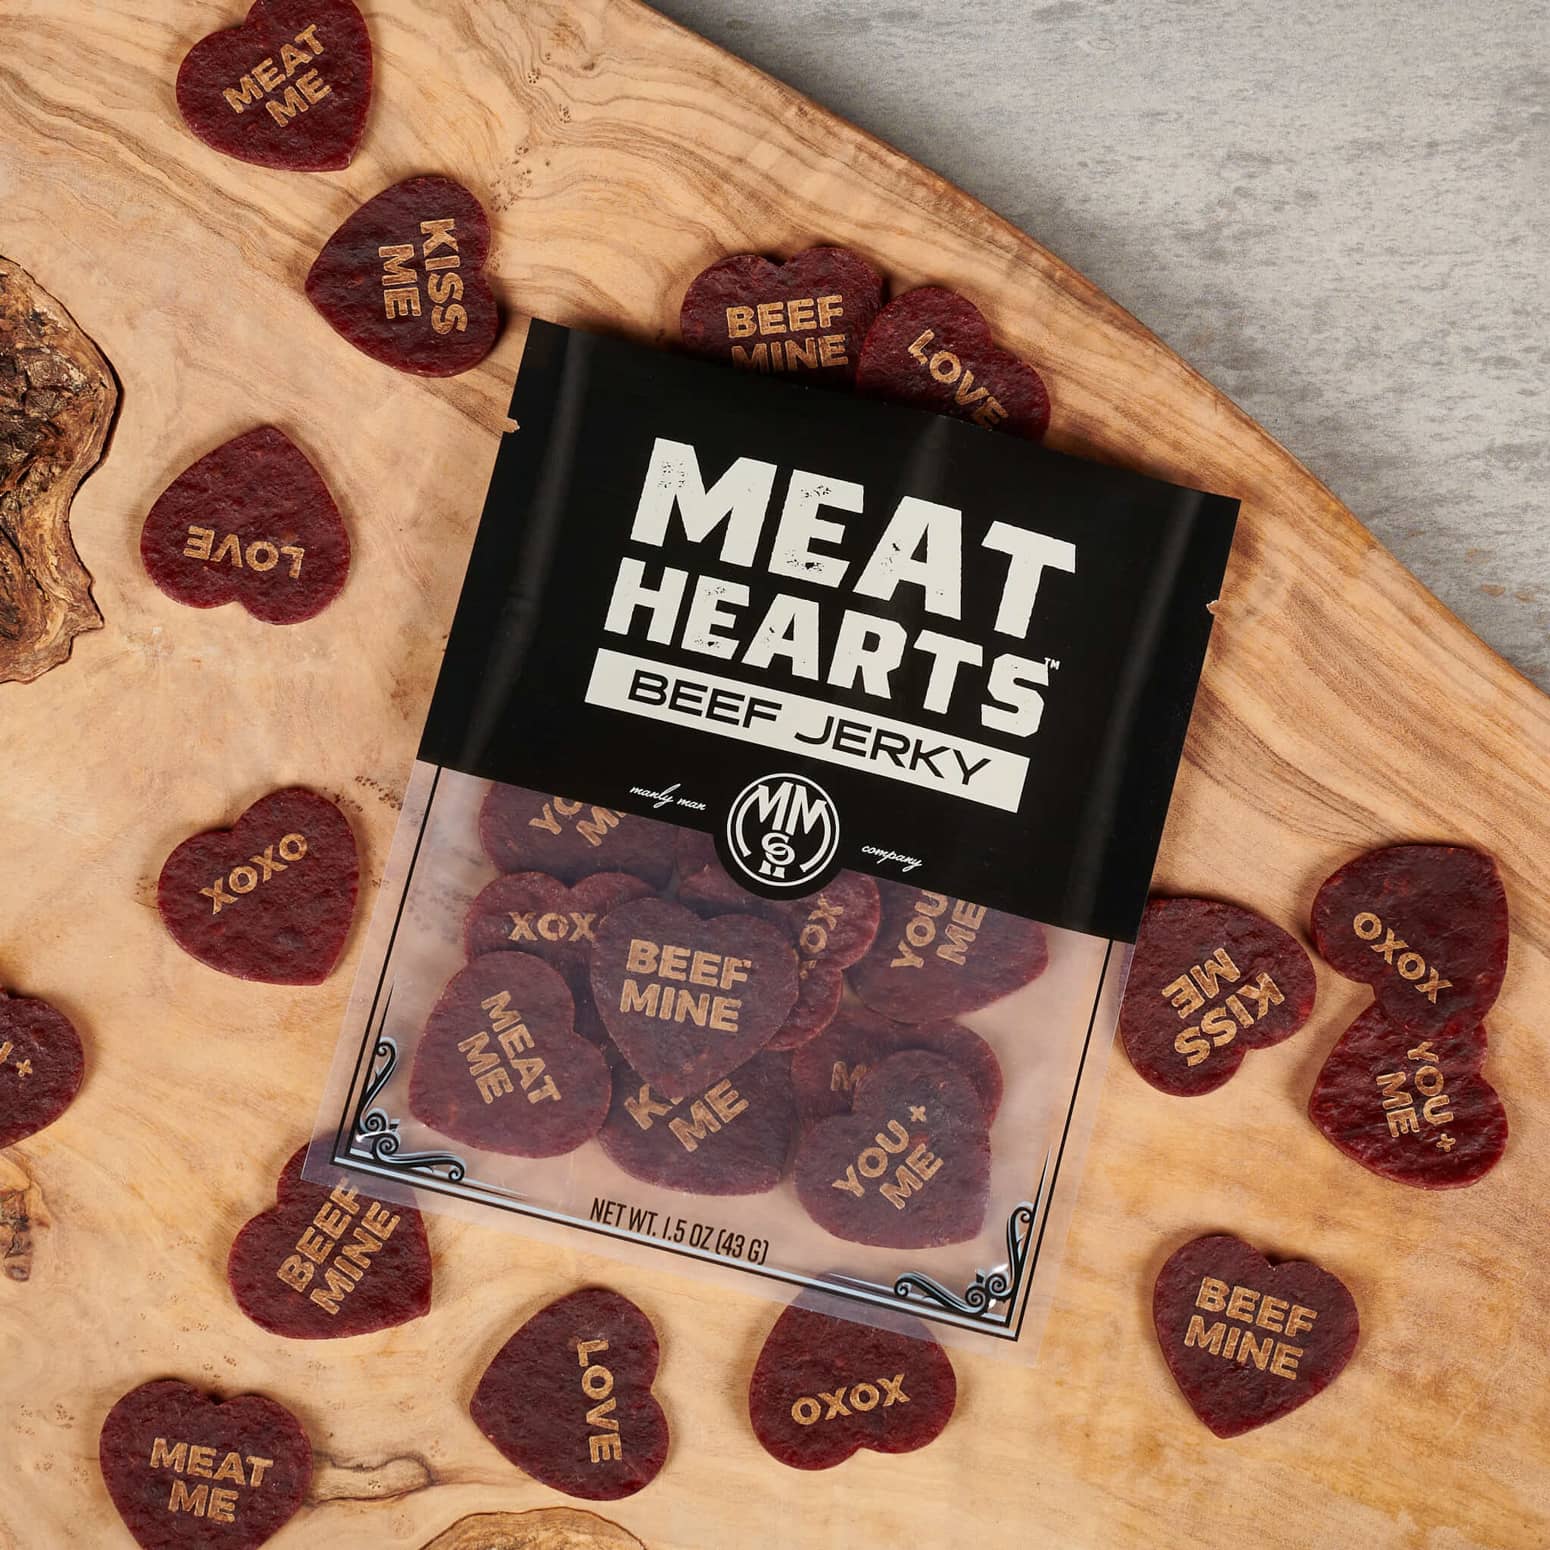 Meathearts - Heart-Shaped Beef Jerky With Romantic Sayings